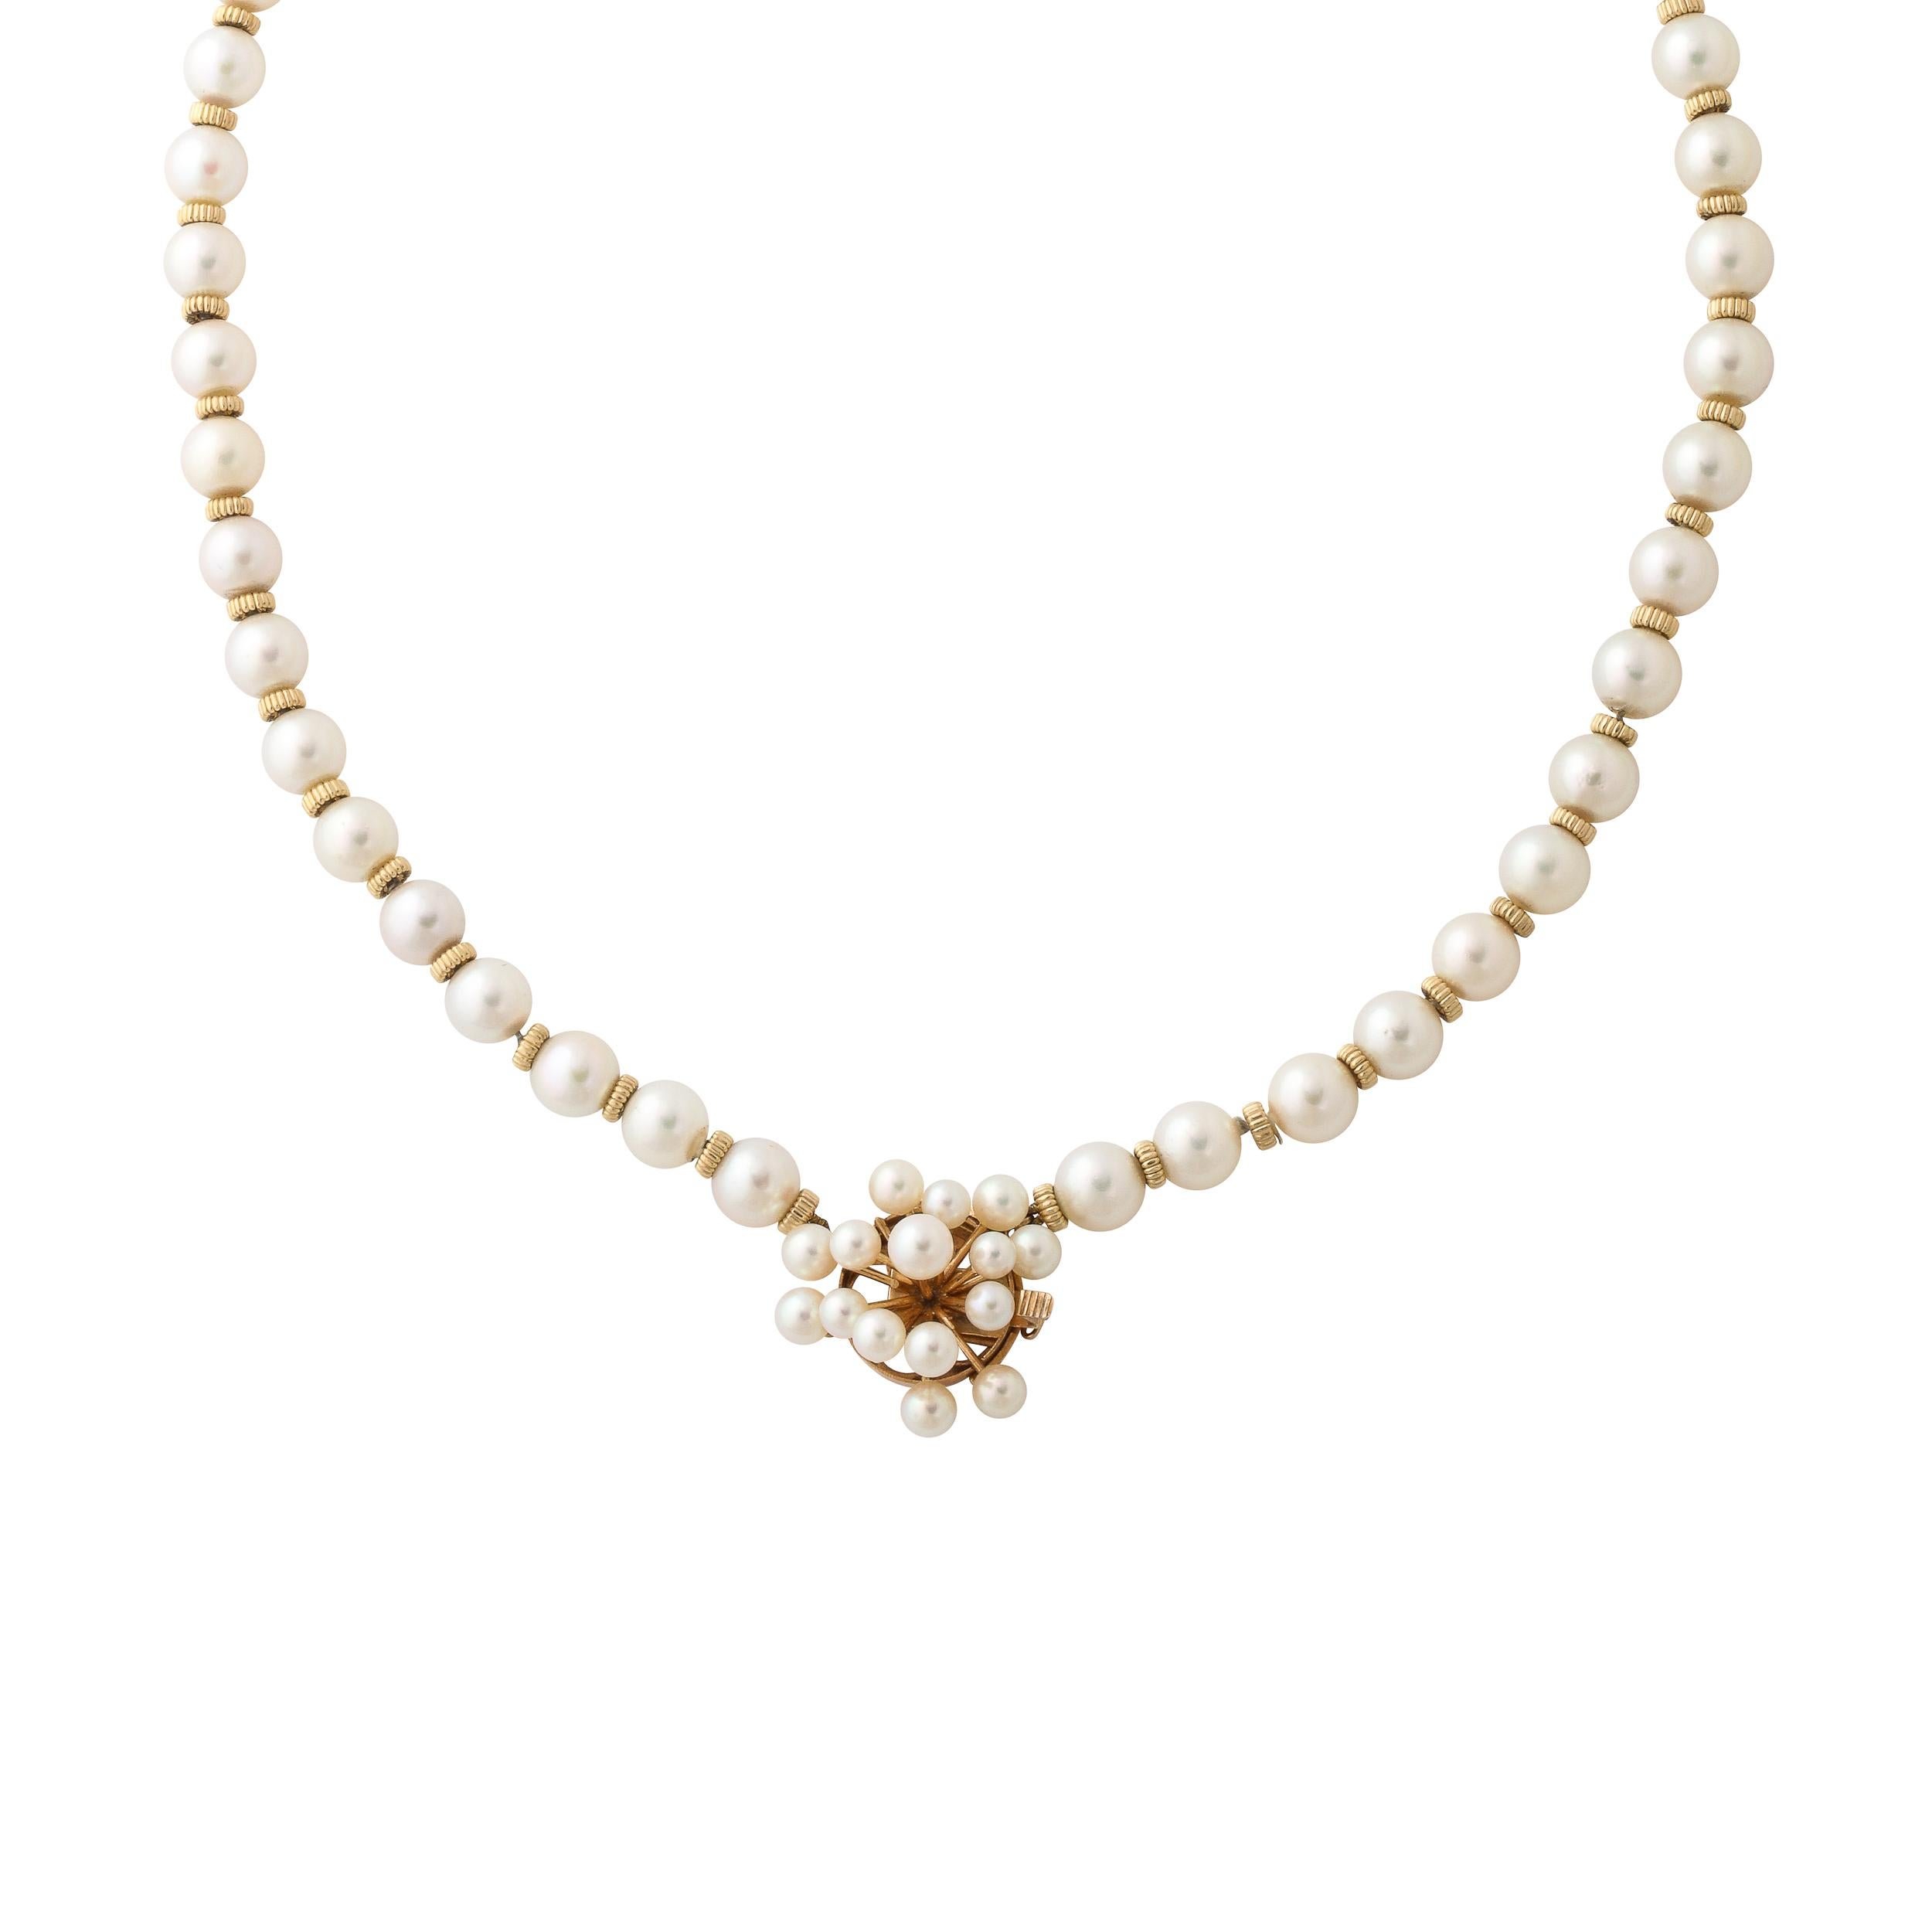 This Mid -Century Modernist pearl and 14k gold necklace is fitted with approximately 7mm pearls with a ribbed 14k gold spacer between each pearl and finished with a sputnik form clasp in 14k yellow gold set with 14 pearls . The clasp is marked 14k